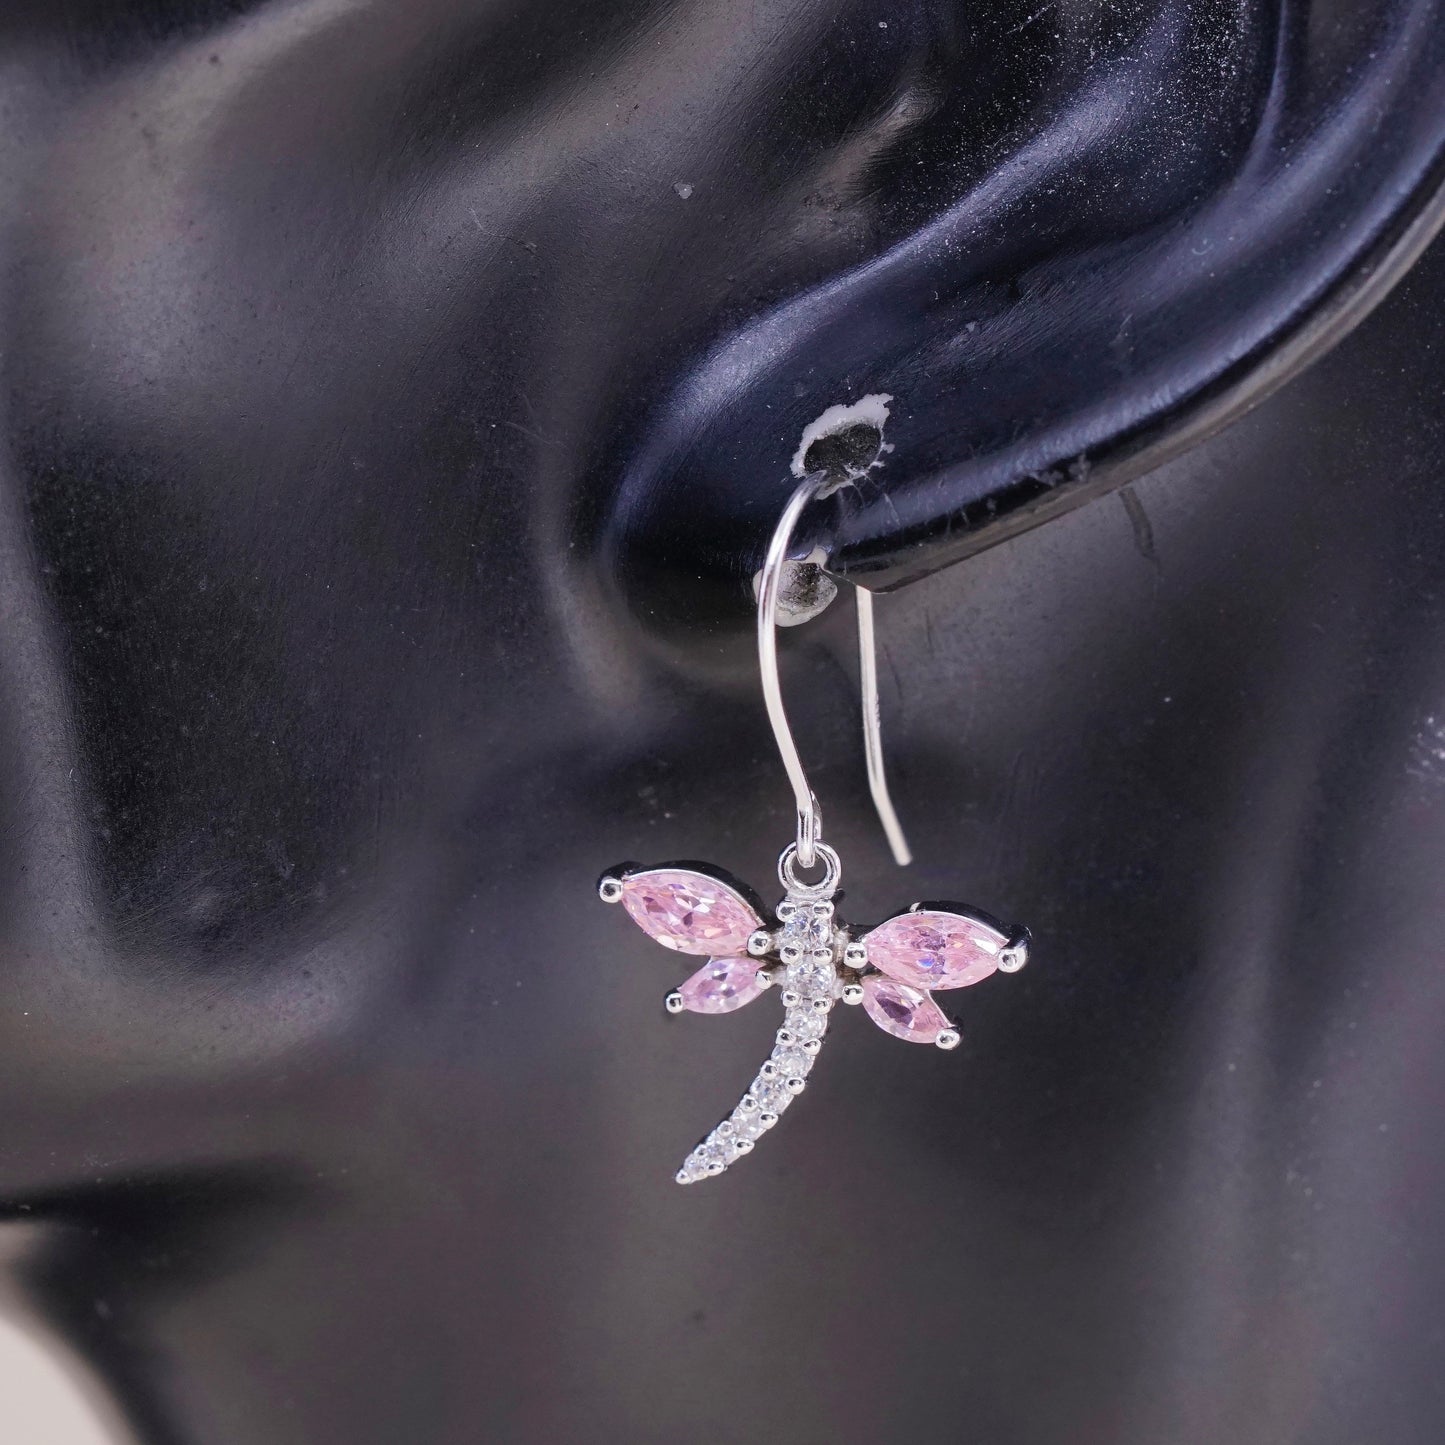 Vintage handmade sterling 925 silver dragonfly earrings with pink Cz